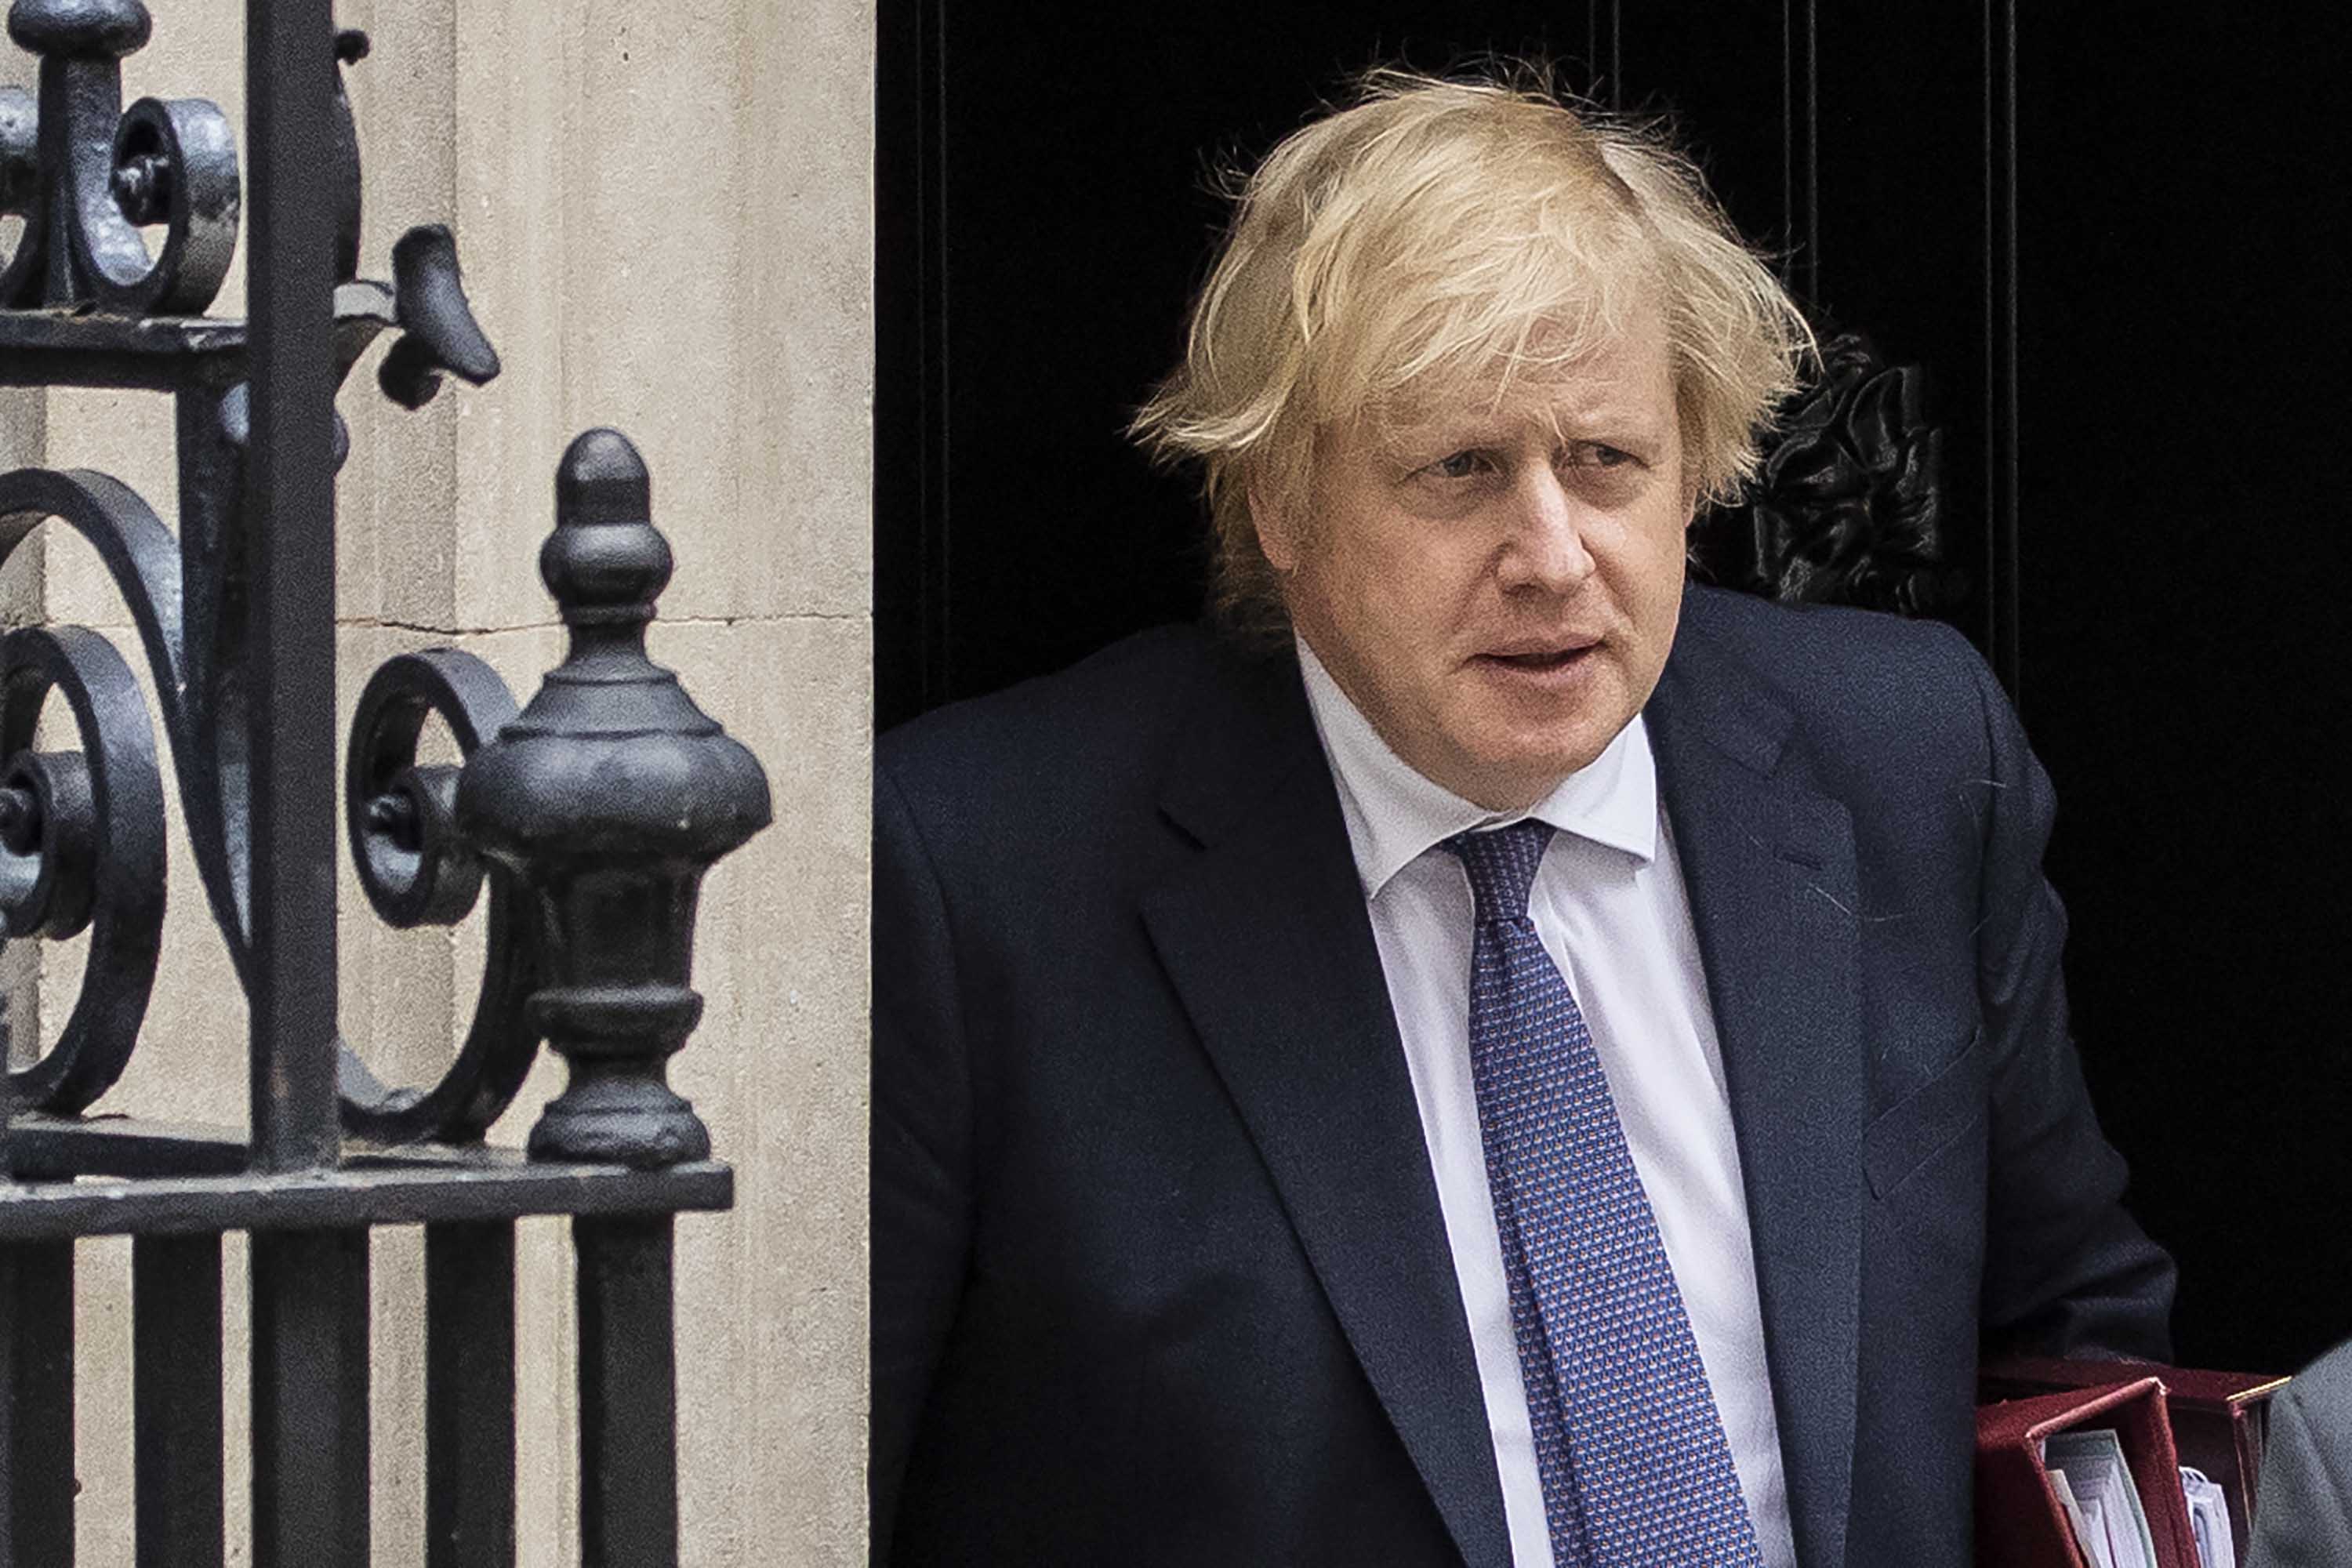 British Prime Minister Boris Johnson was pictured leaving the 10 Downing Streets in London on July 1.